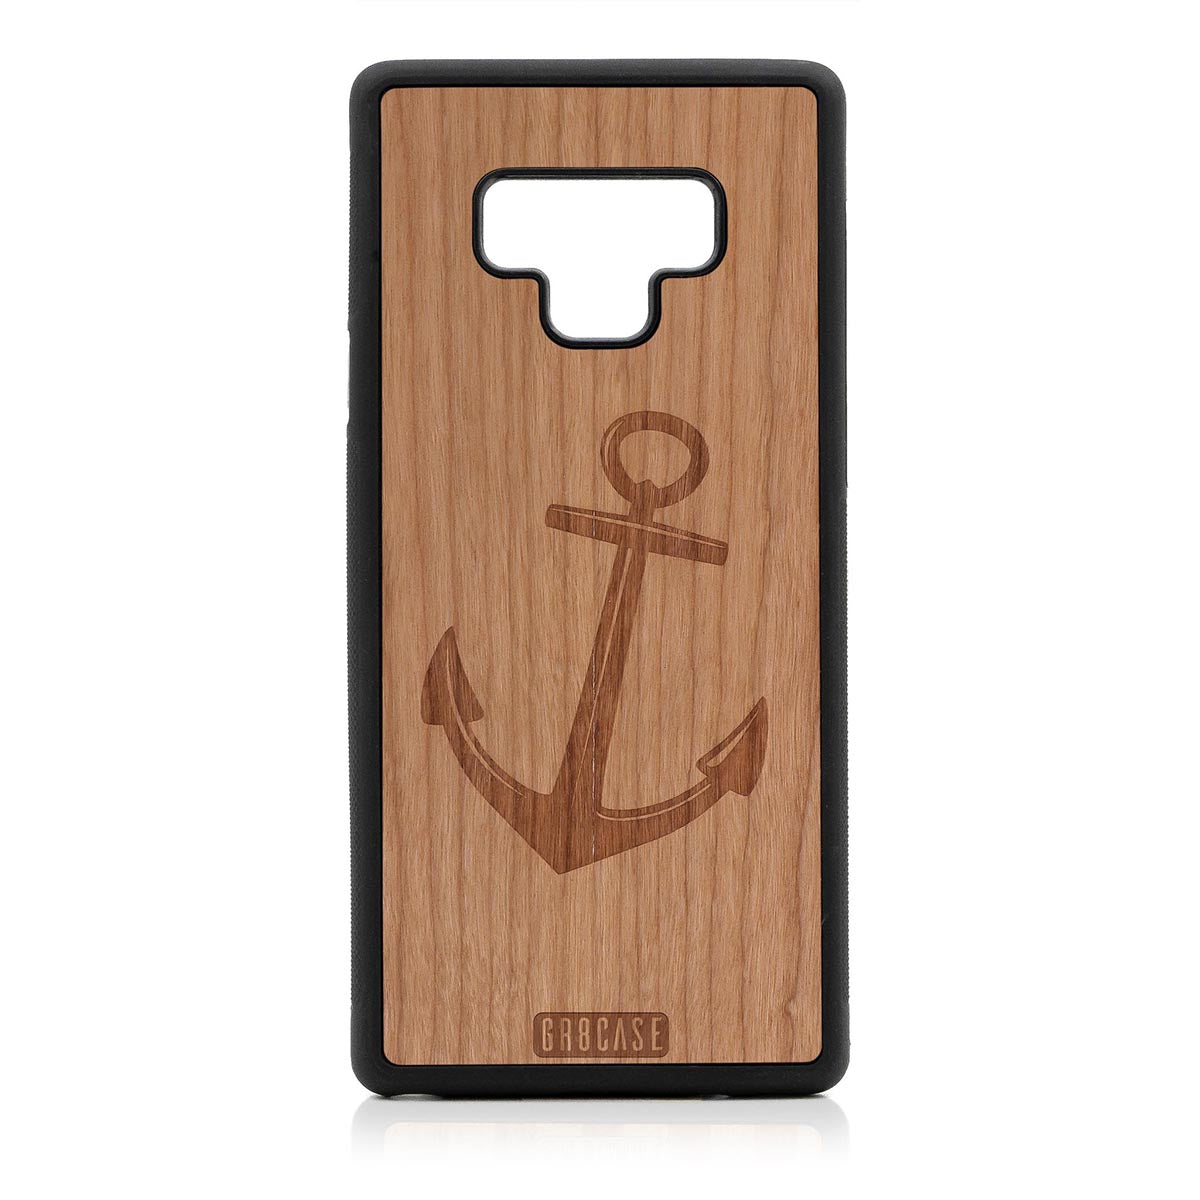 Anchor Design Wood Case For Samsung Galaxy Note 9 by GR8CASE